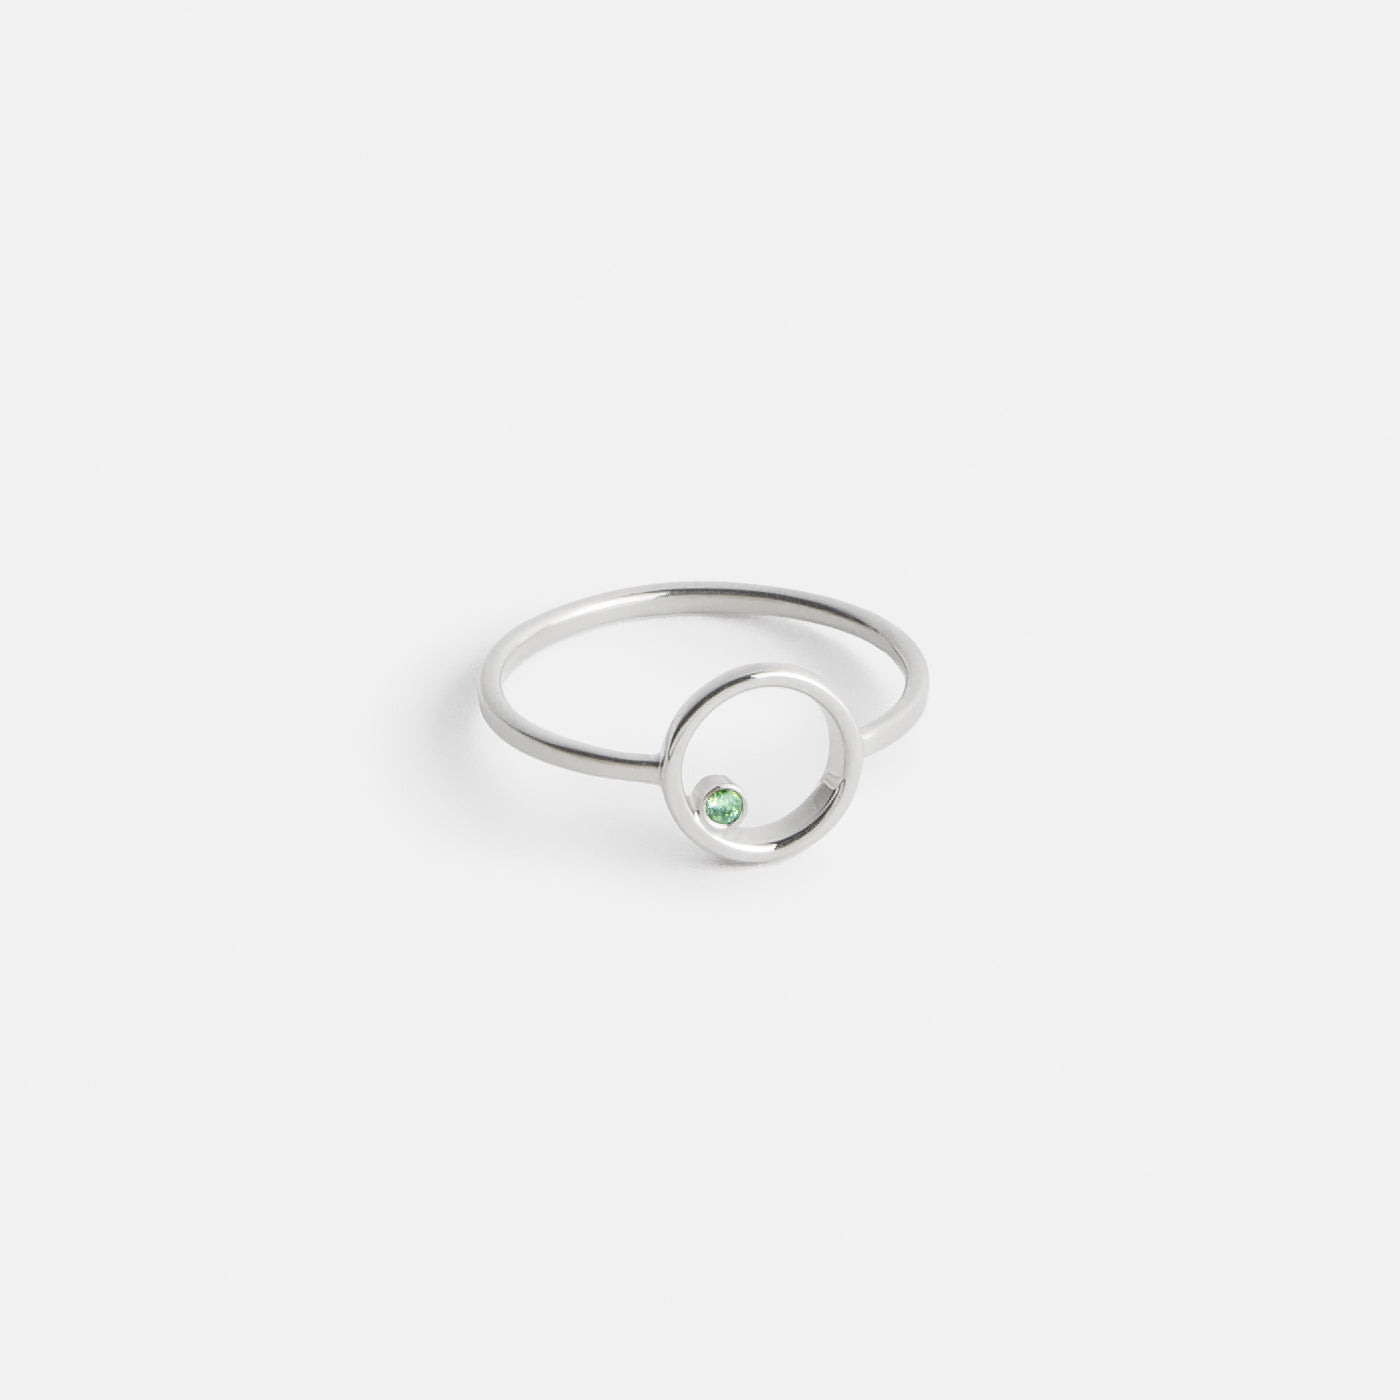 Ila Thin Ring in Sterling Silver set with Green Diamond by SHW Fine Jewelry NYC